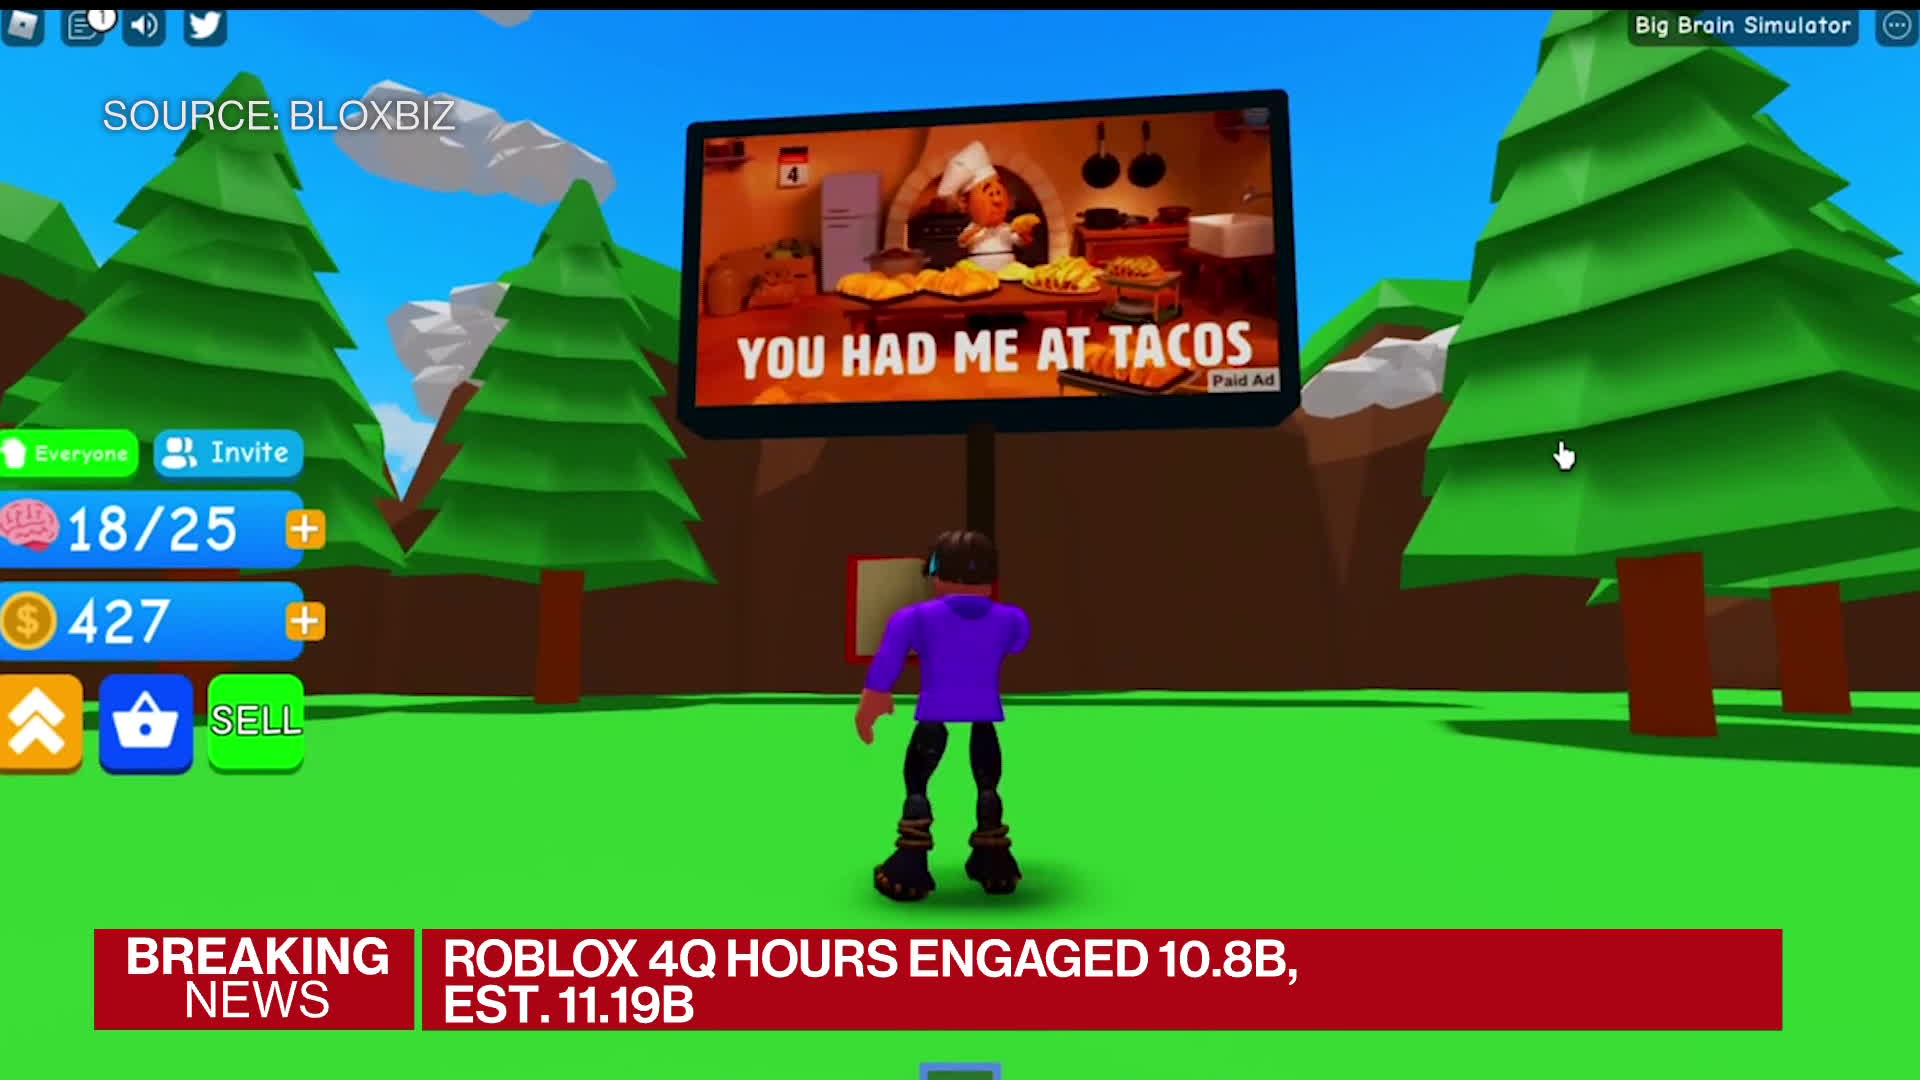 Roblox Trading News on X: Recently Roblox gambling sites such as @rbxflip  @bloxflip and @rblx_wild have been exploding in popularity and Roblox has  been turning a blind eye. These sites at peak